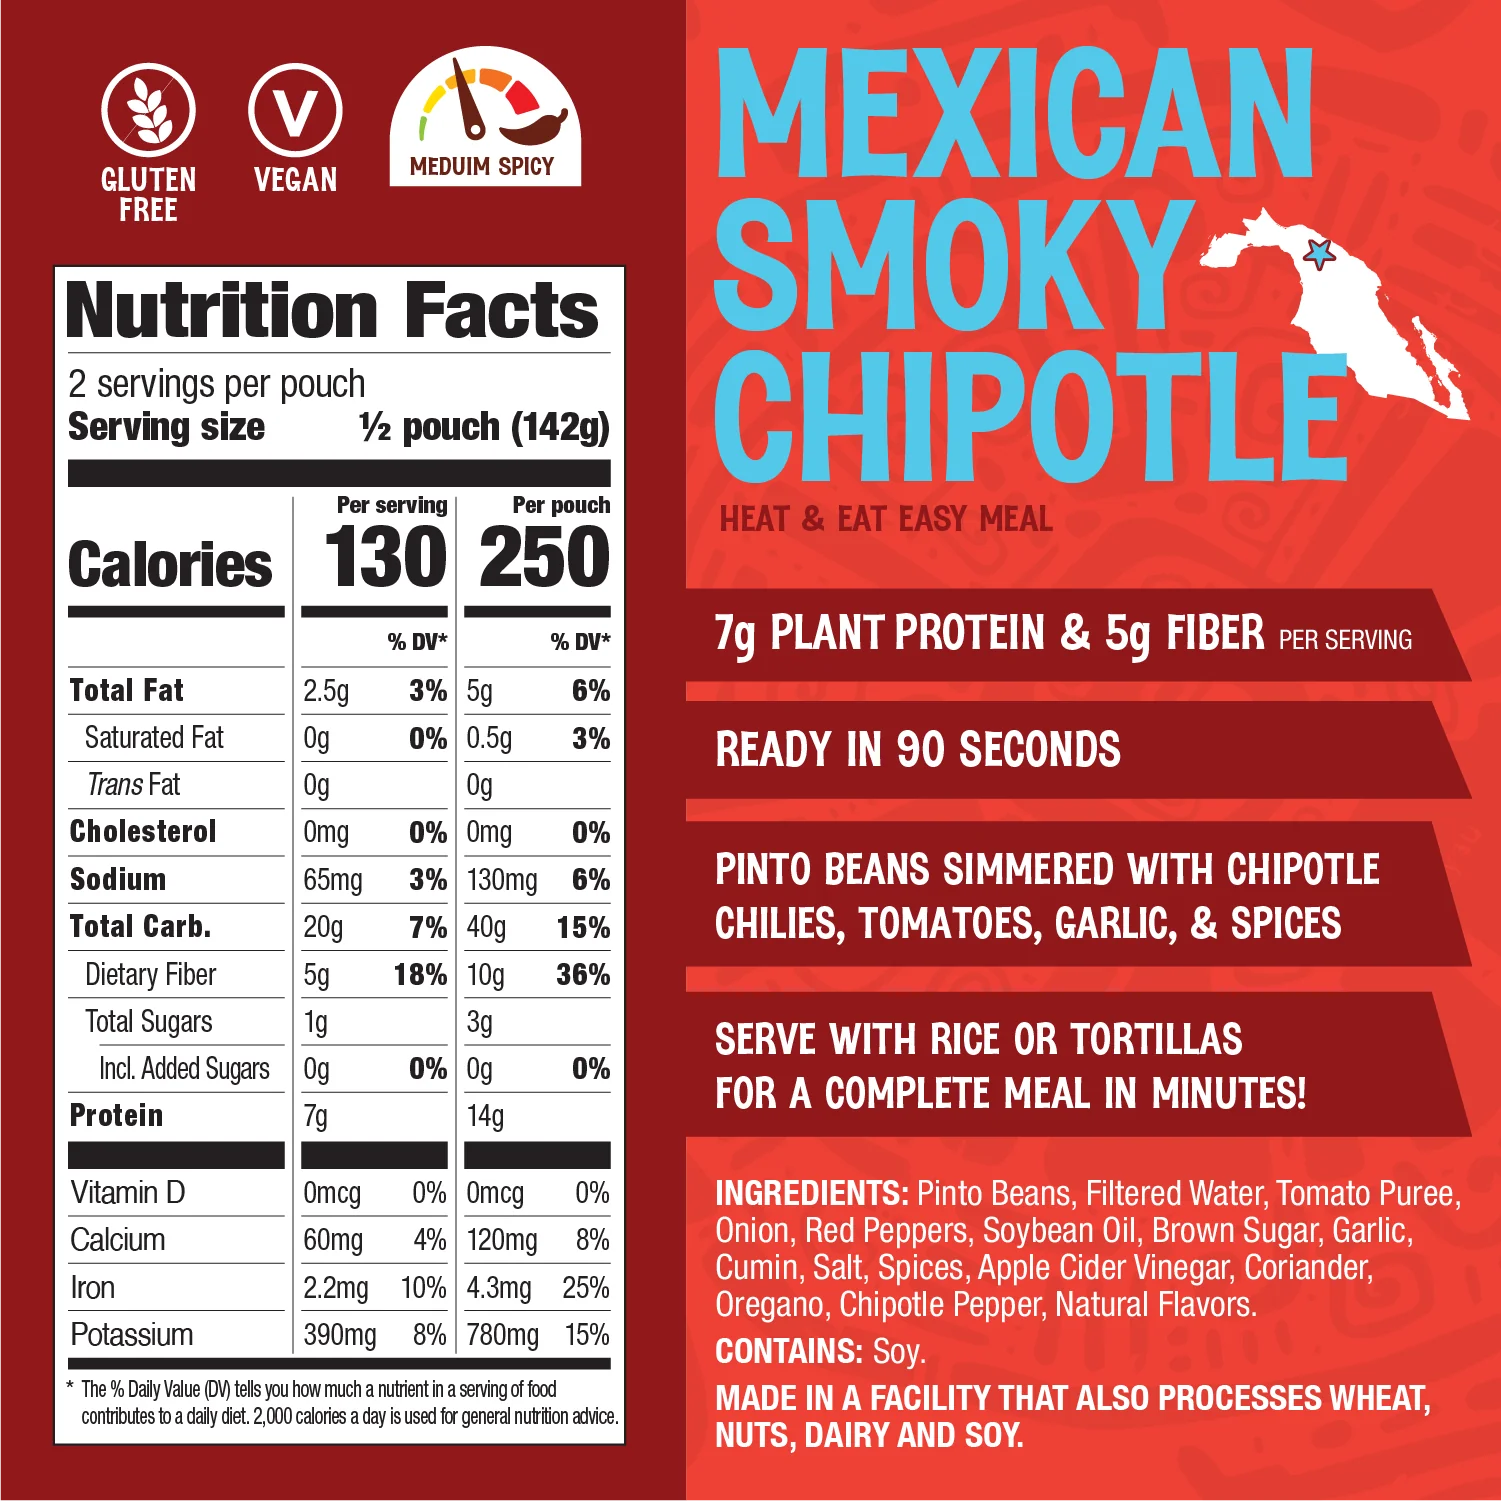 nutritional label for mexican smoky chipotle